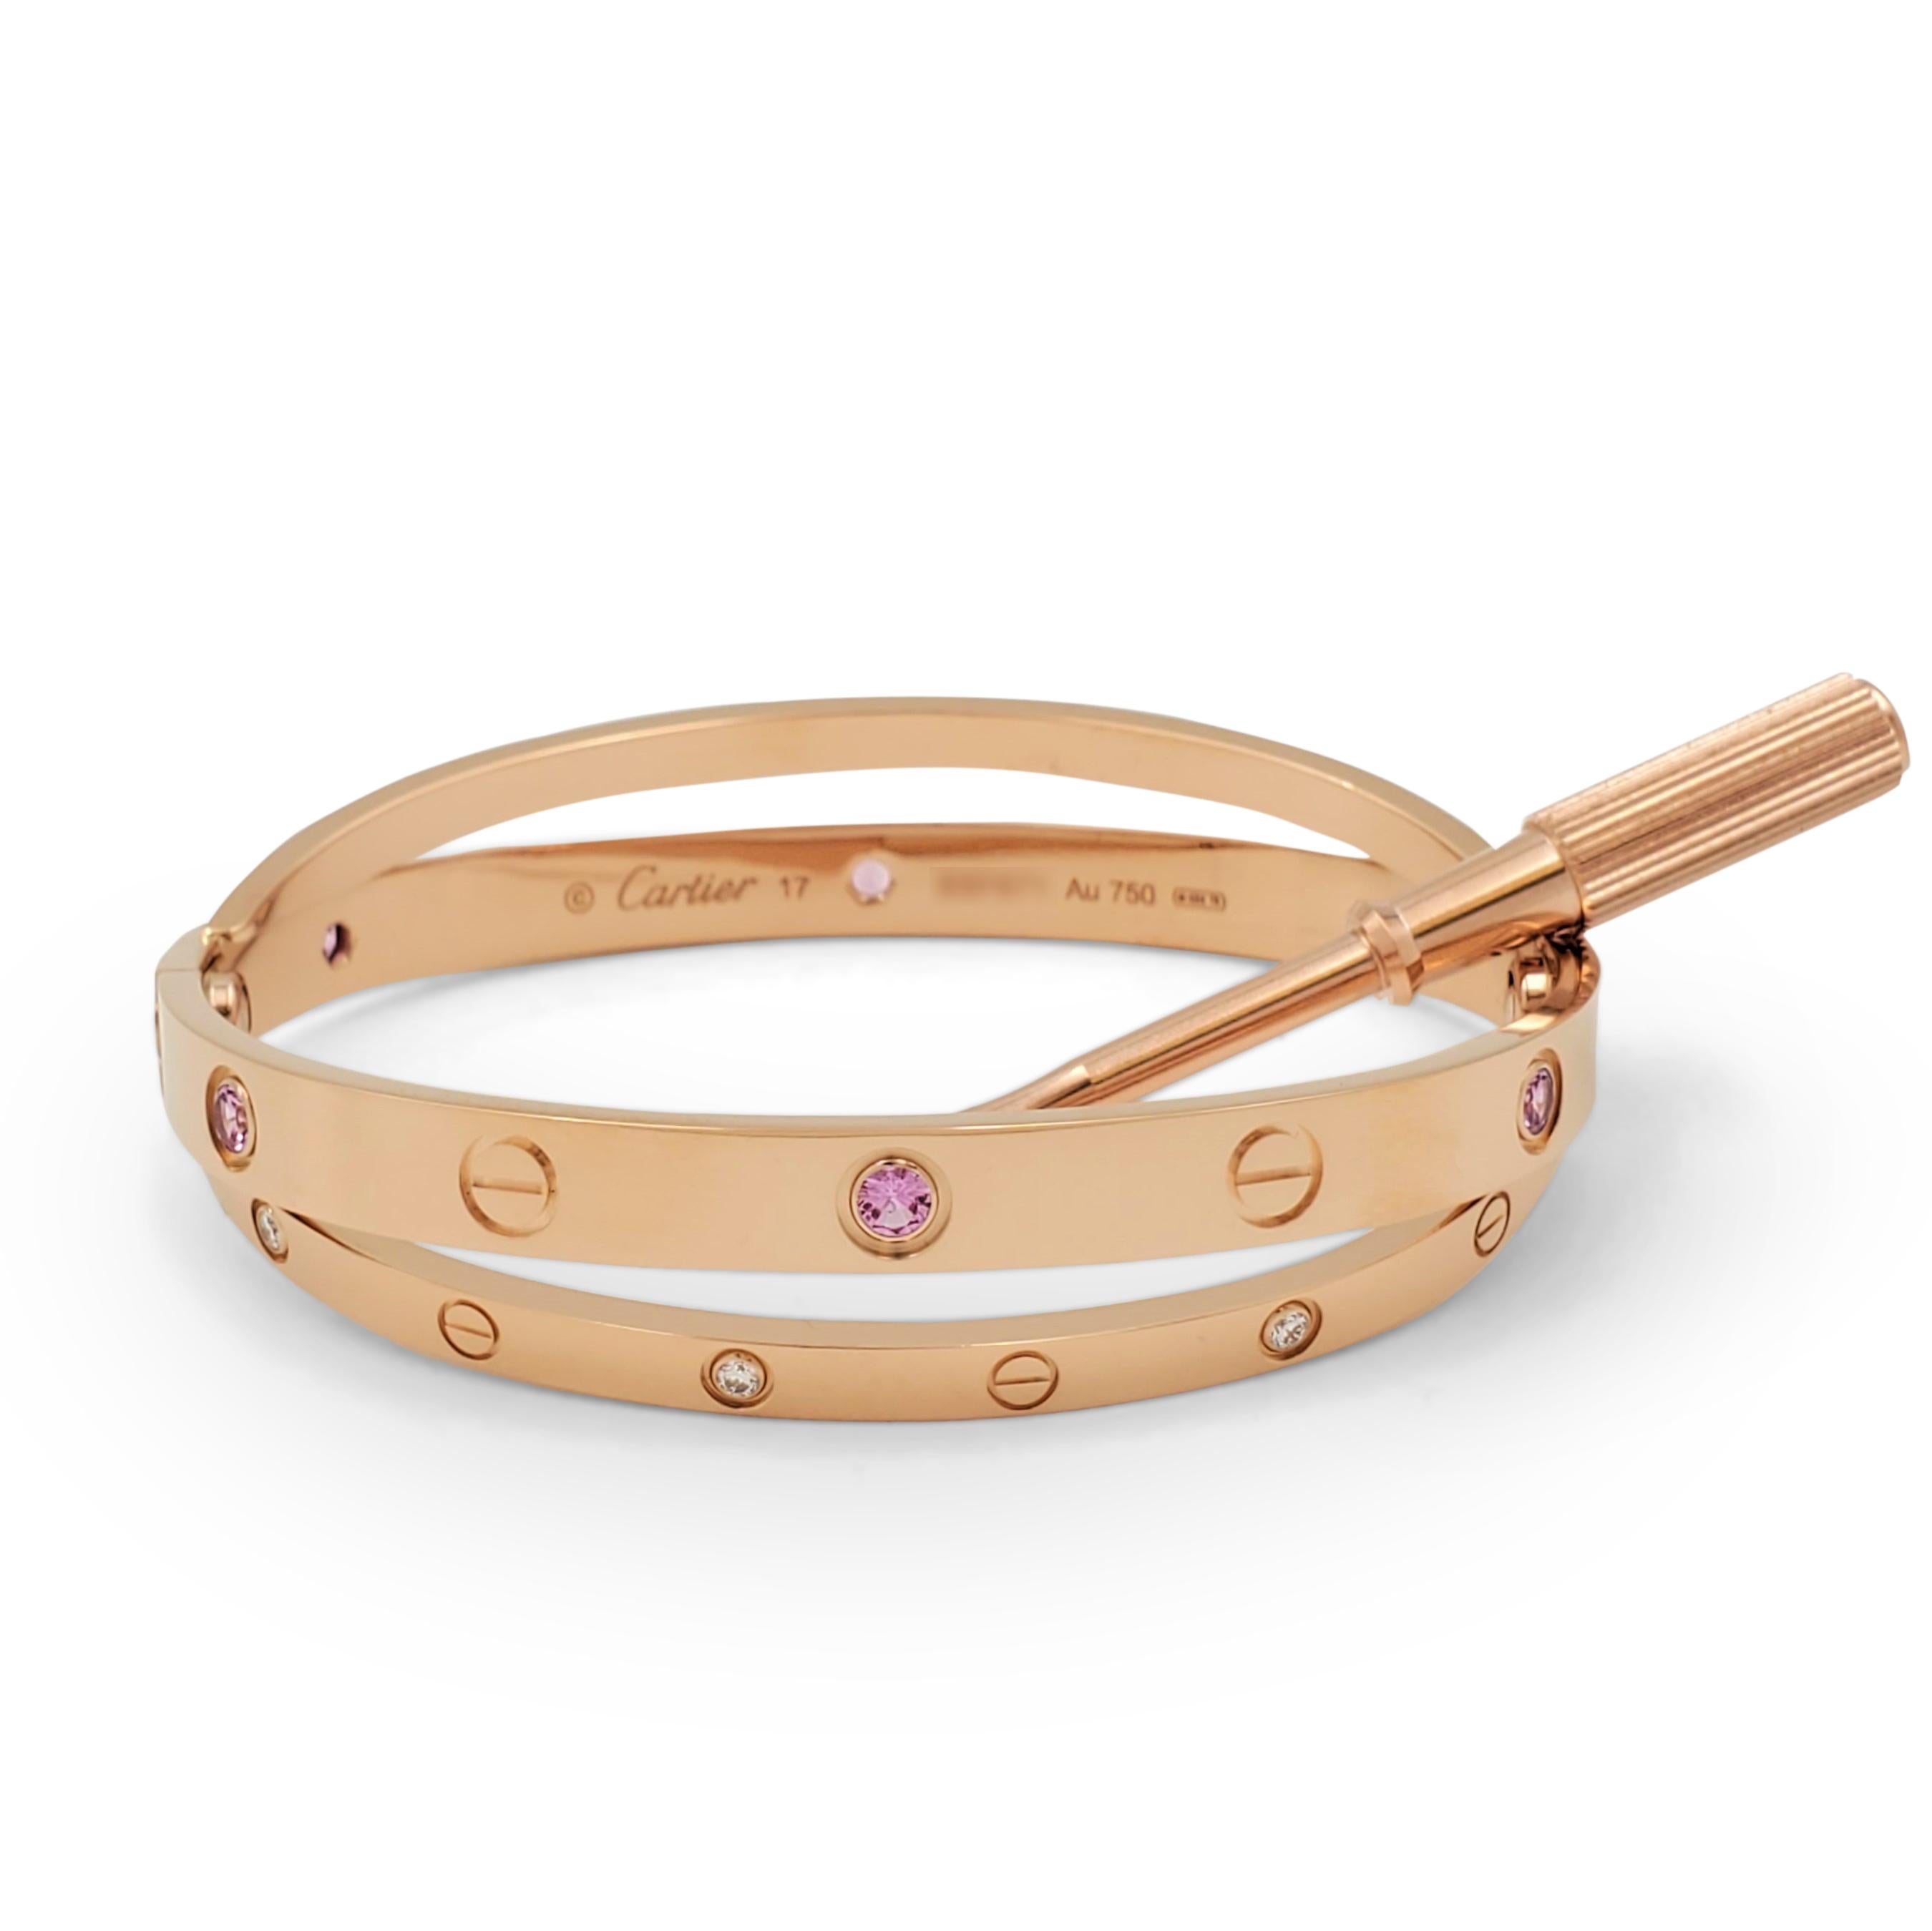 Authentic Cartier 'Love' bracelet comprised of crisscrossing bands of 18 karat rose gold. The bracelet is set with high-quality round brilliant diamonds (E-F, VS)  and vibrant pink sapphire stones. Signed Cartier, Au750, 17 with serial number. The